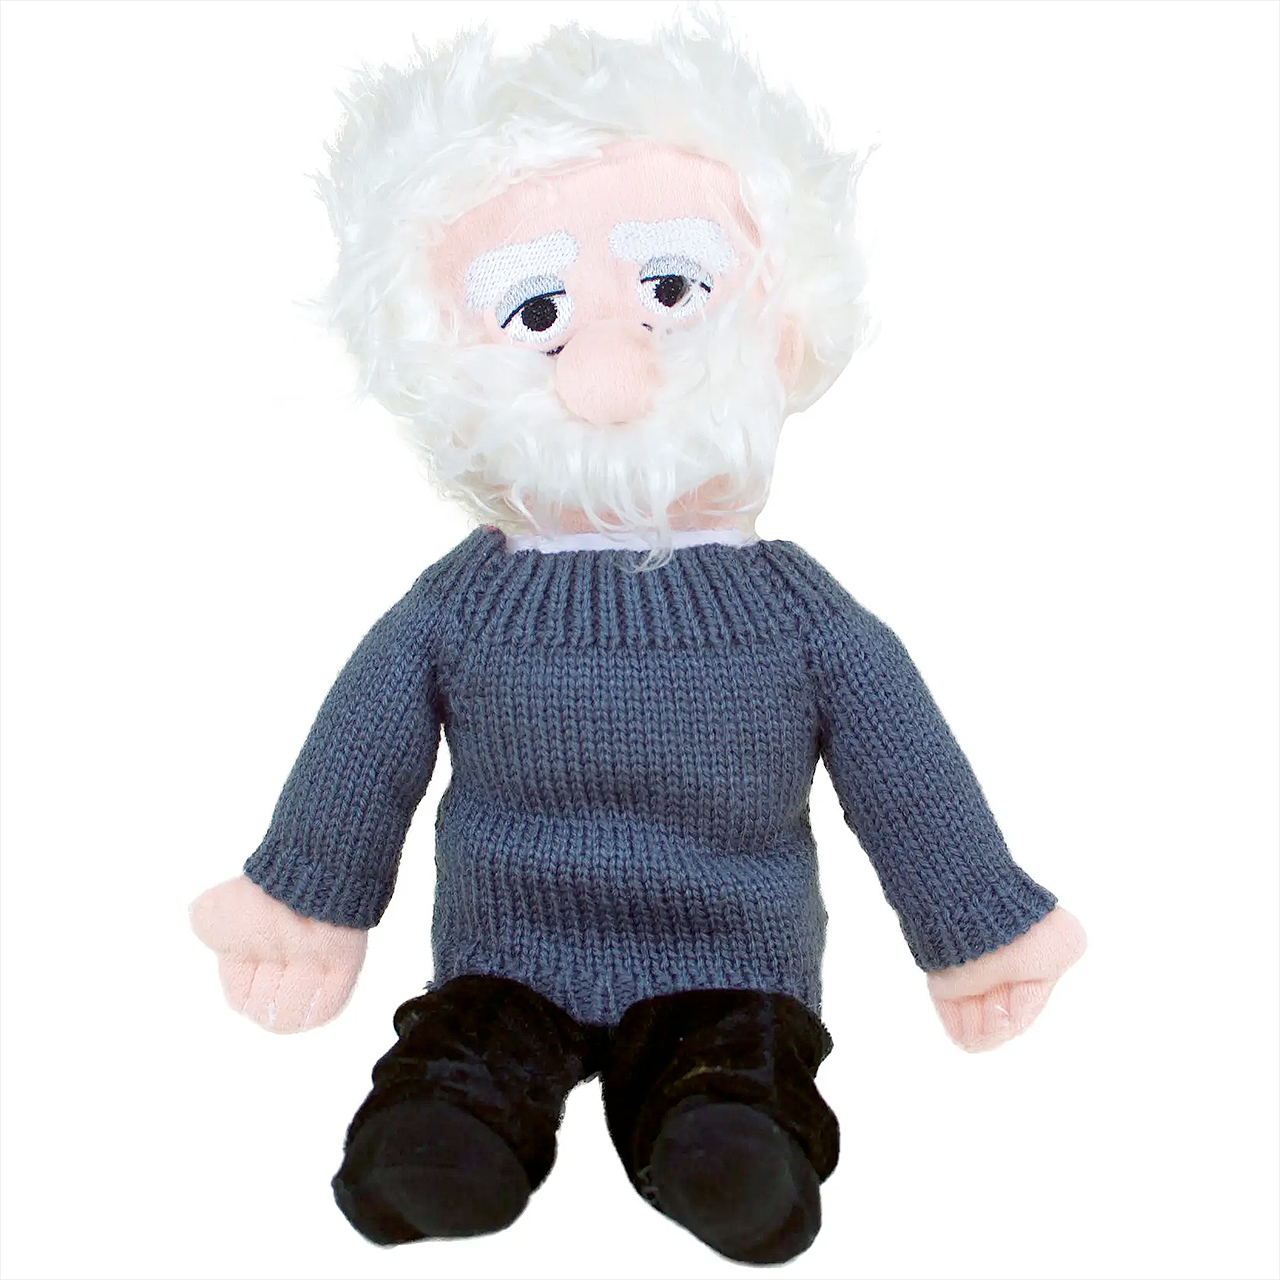 Albert Einstein Little Thinker plush doll, from The Unemployed Philosophers Guild, was flown by SpaceX Crew-5 astronauts as a zero-g indicator.